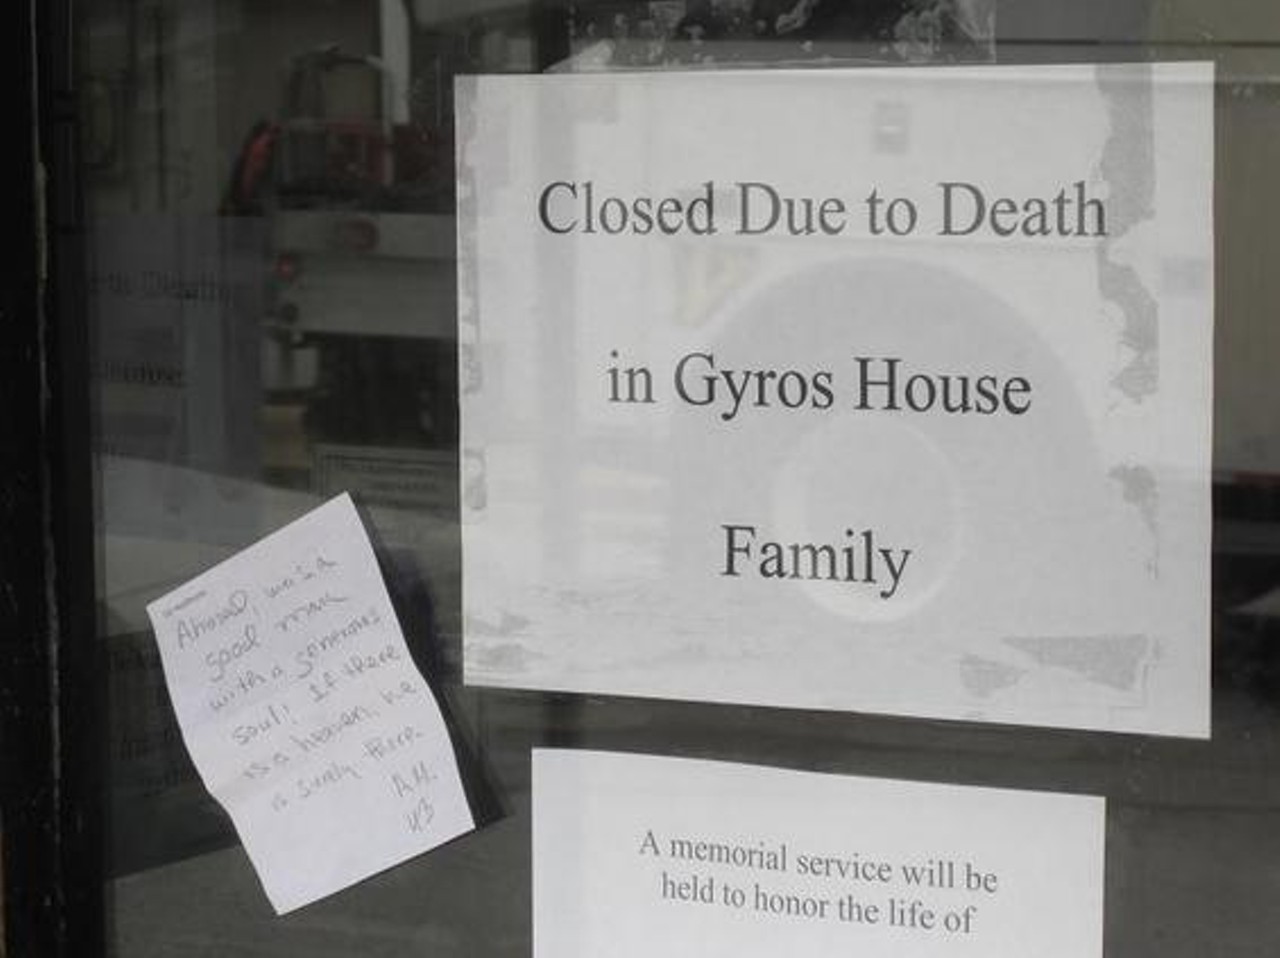 This sign was posted after the recent death of Ahmed Eltawmi, 50, who owned the Gyro House in the Delmar Loop. Eltawmi was shot and killed on June 4, 2010  outside his apartment in Maplewood. Customers, family and friends placed flowers next at the foot of the door outside the business. Read more about this story.